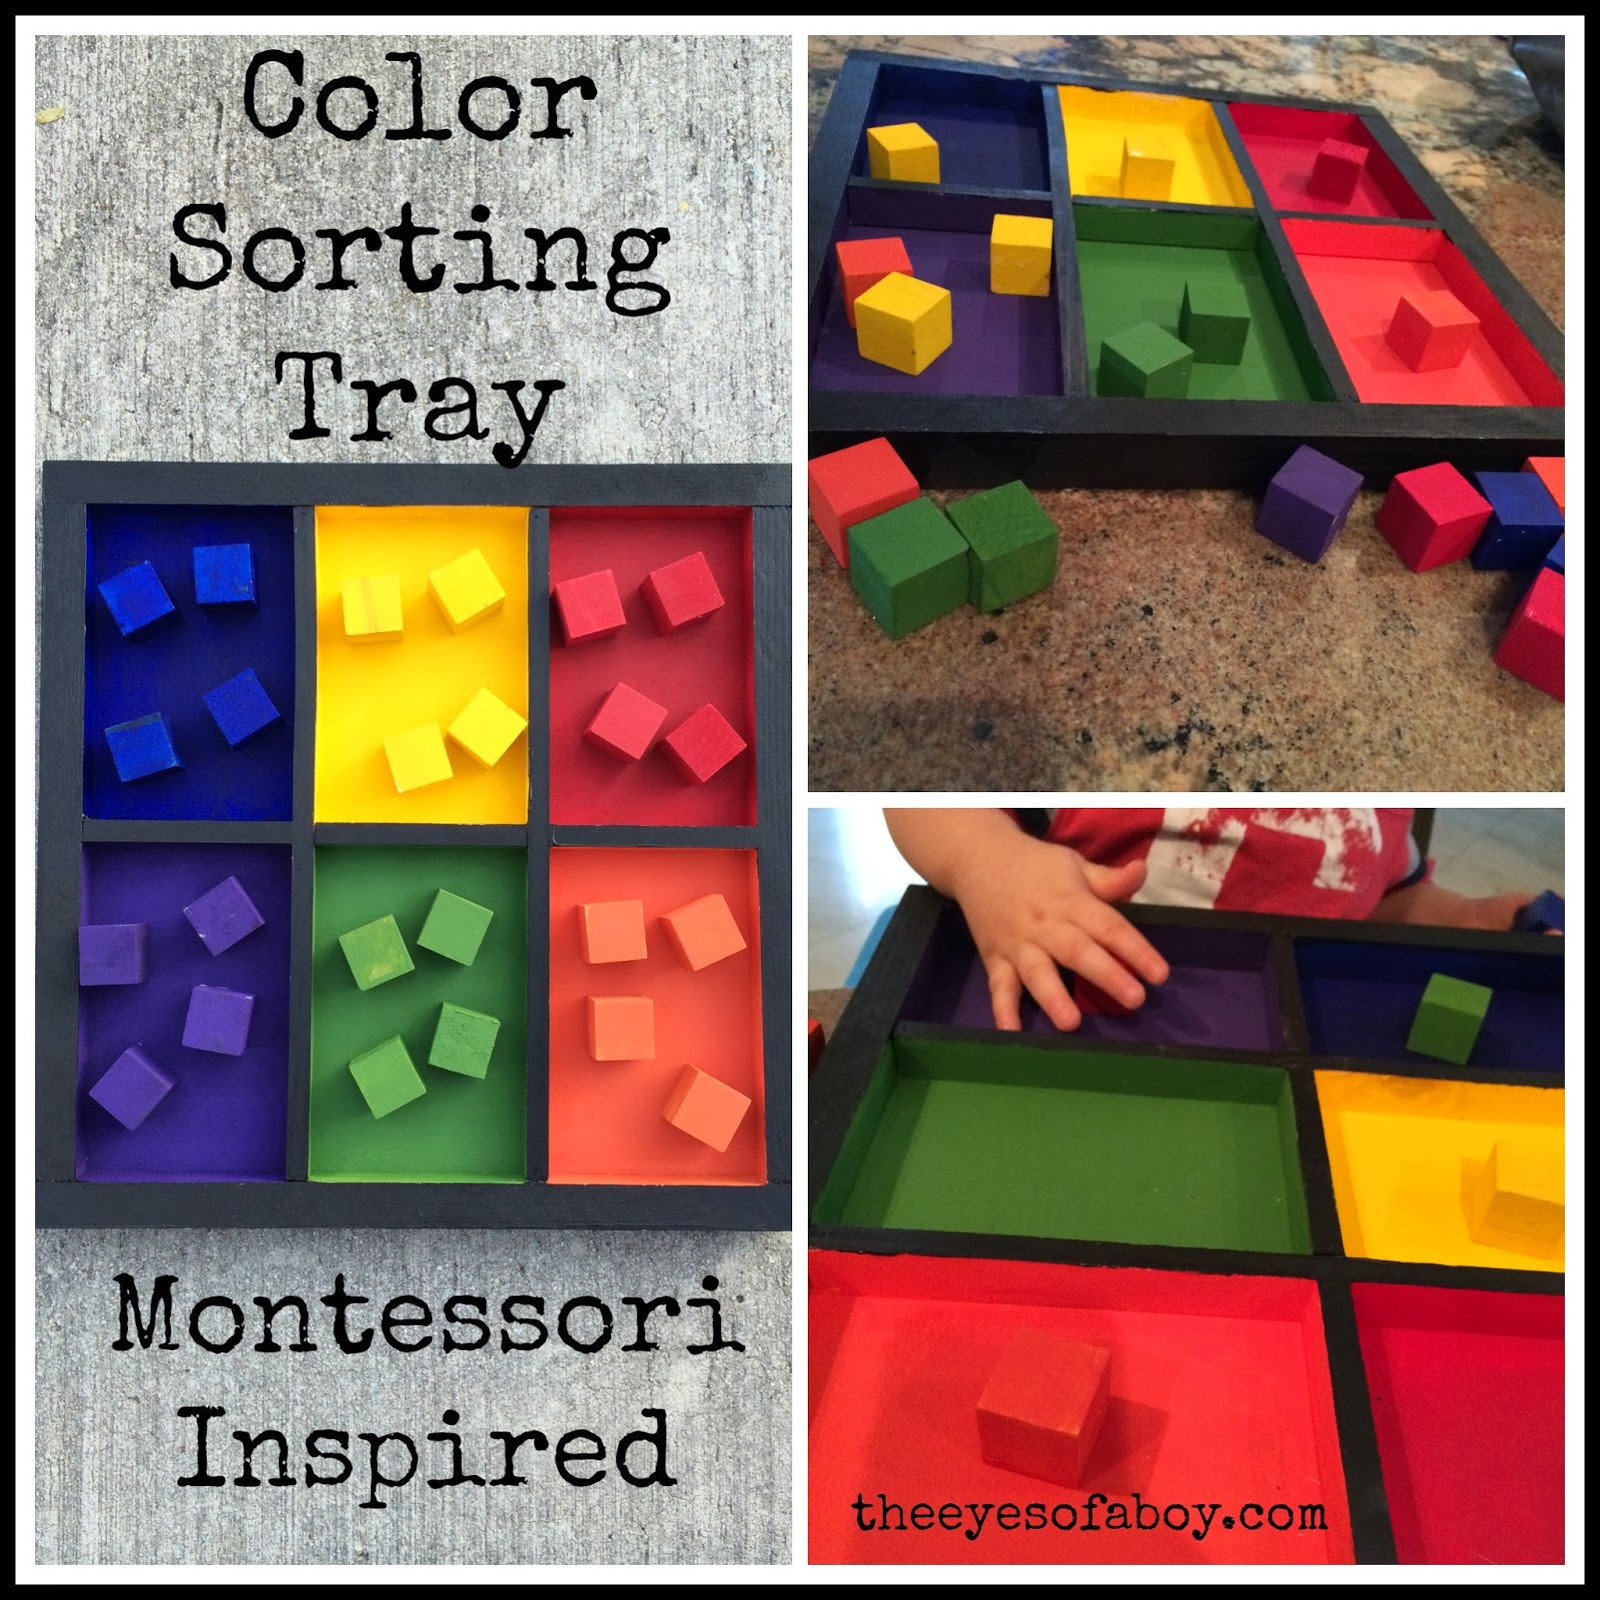 DIY Learning Activities For Toddlers
 Montessori Inspired Wooden Color Sorting Tray DIY